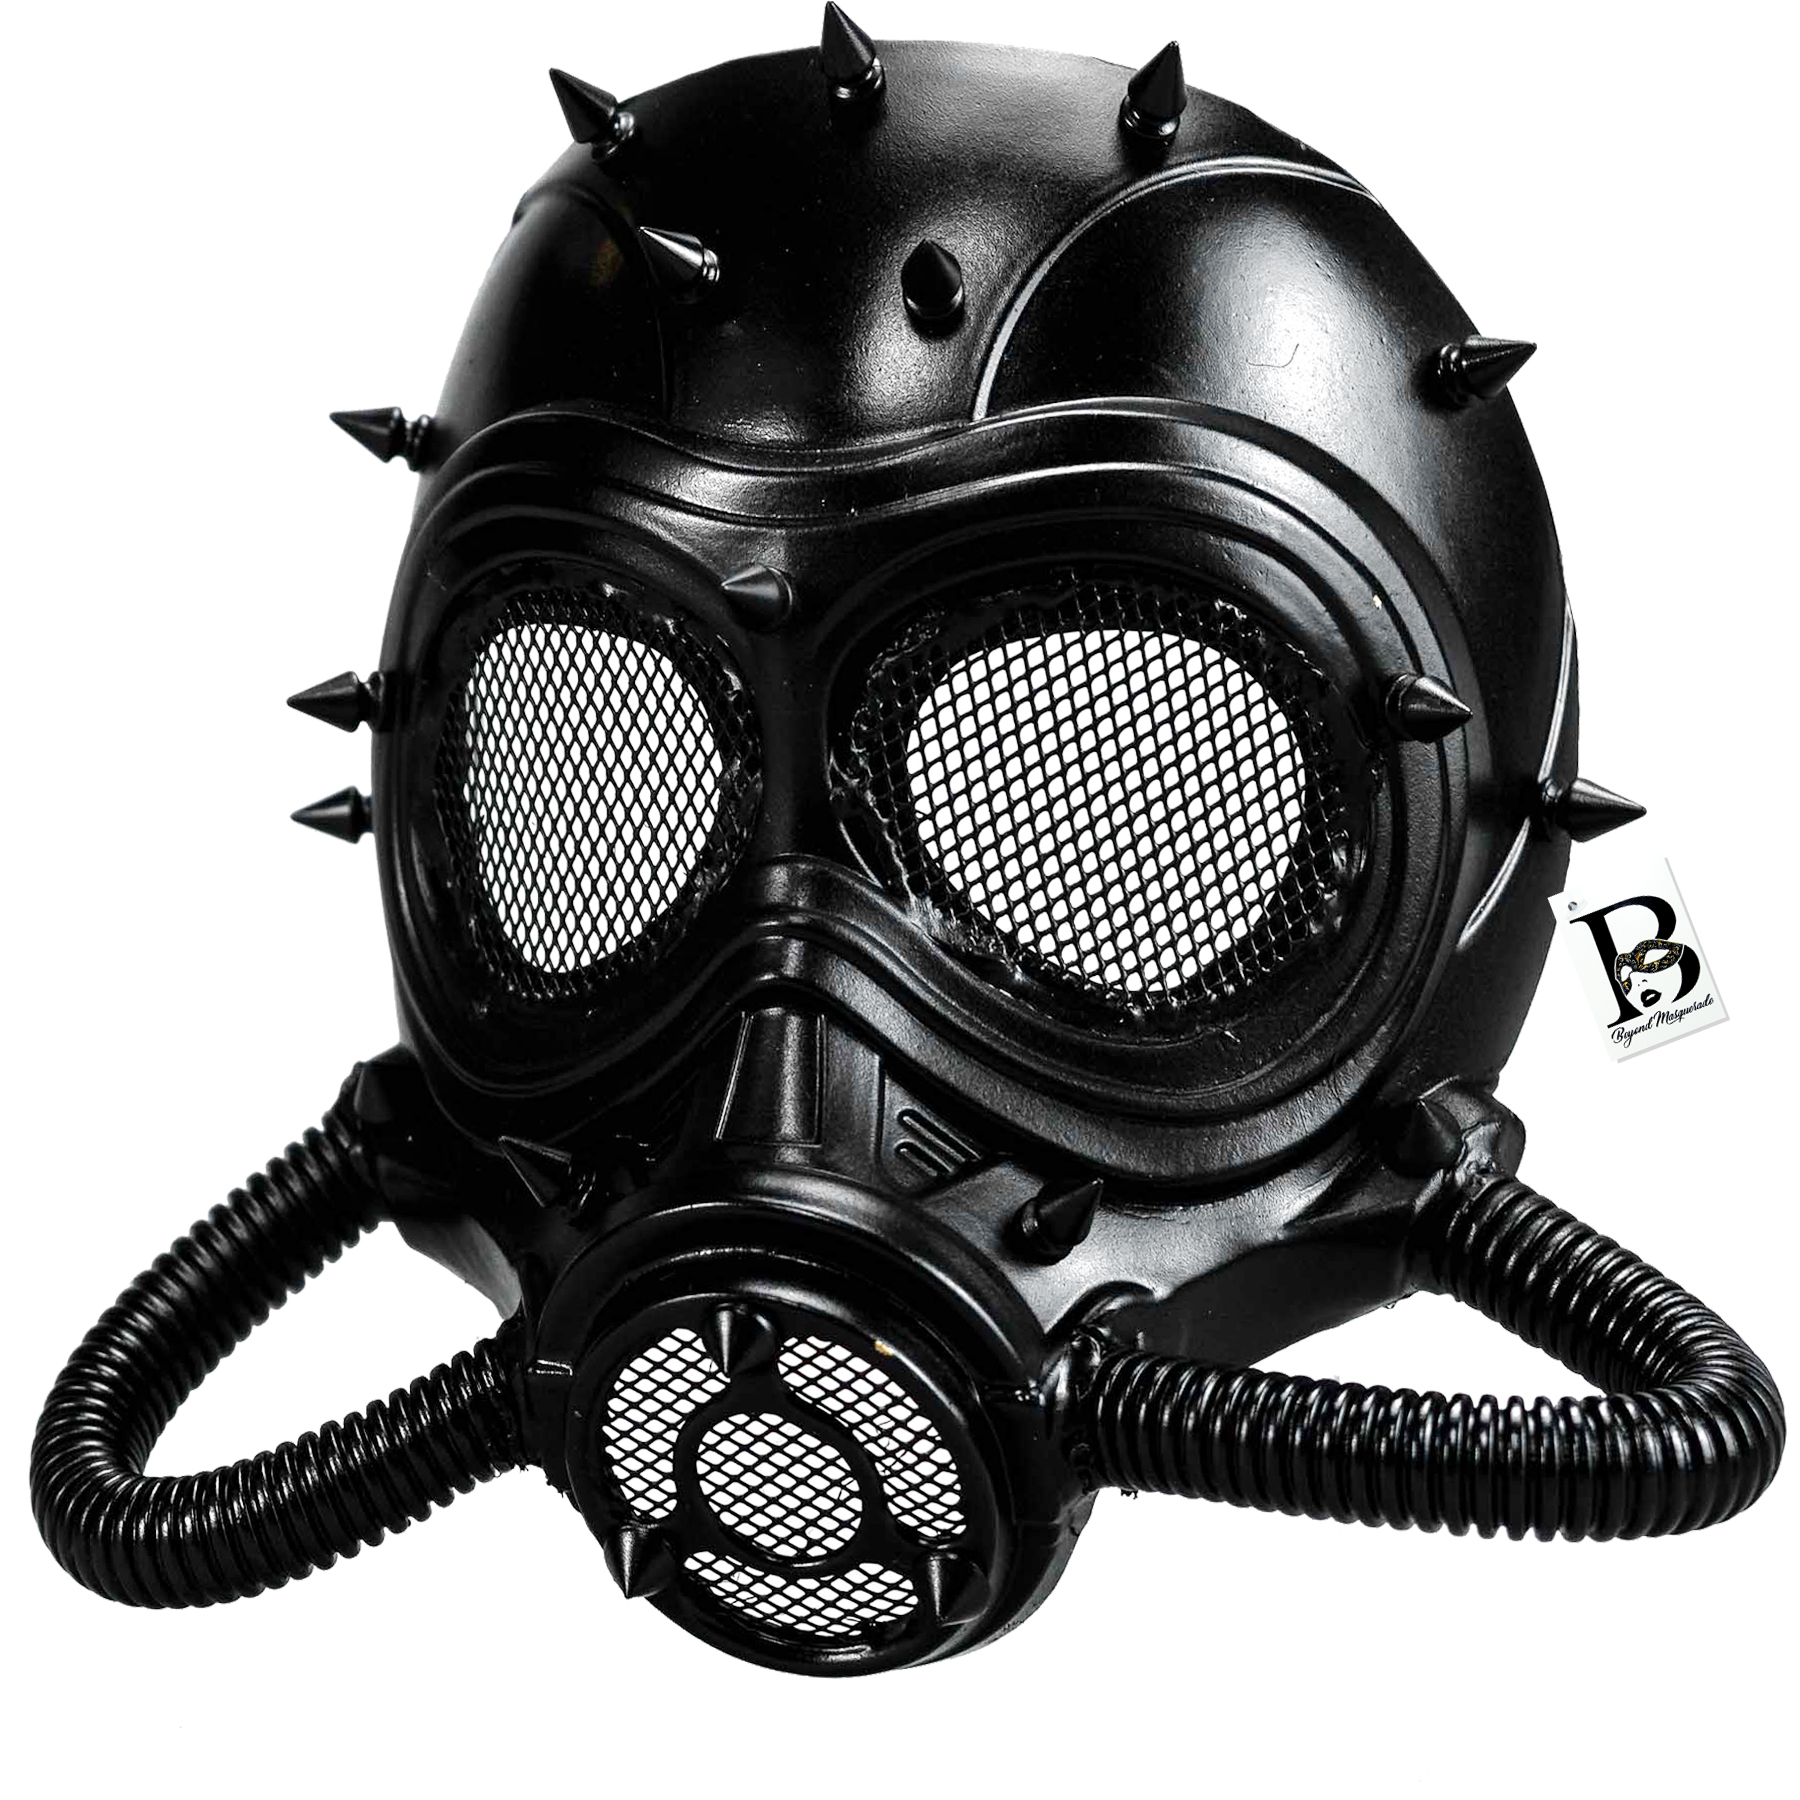 CM-7M Military Gas Mask CBRN Protection